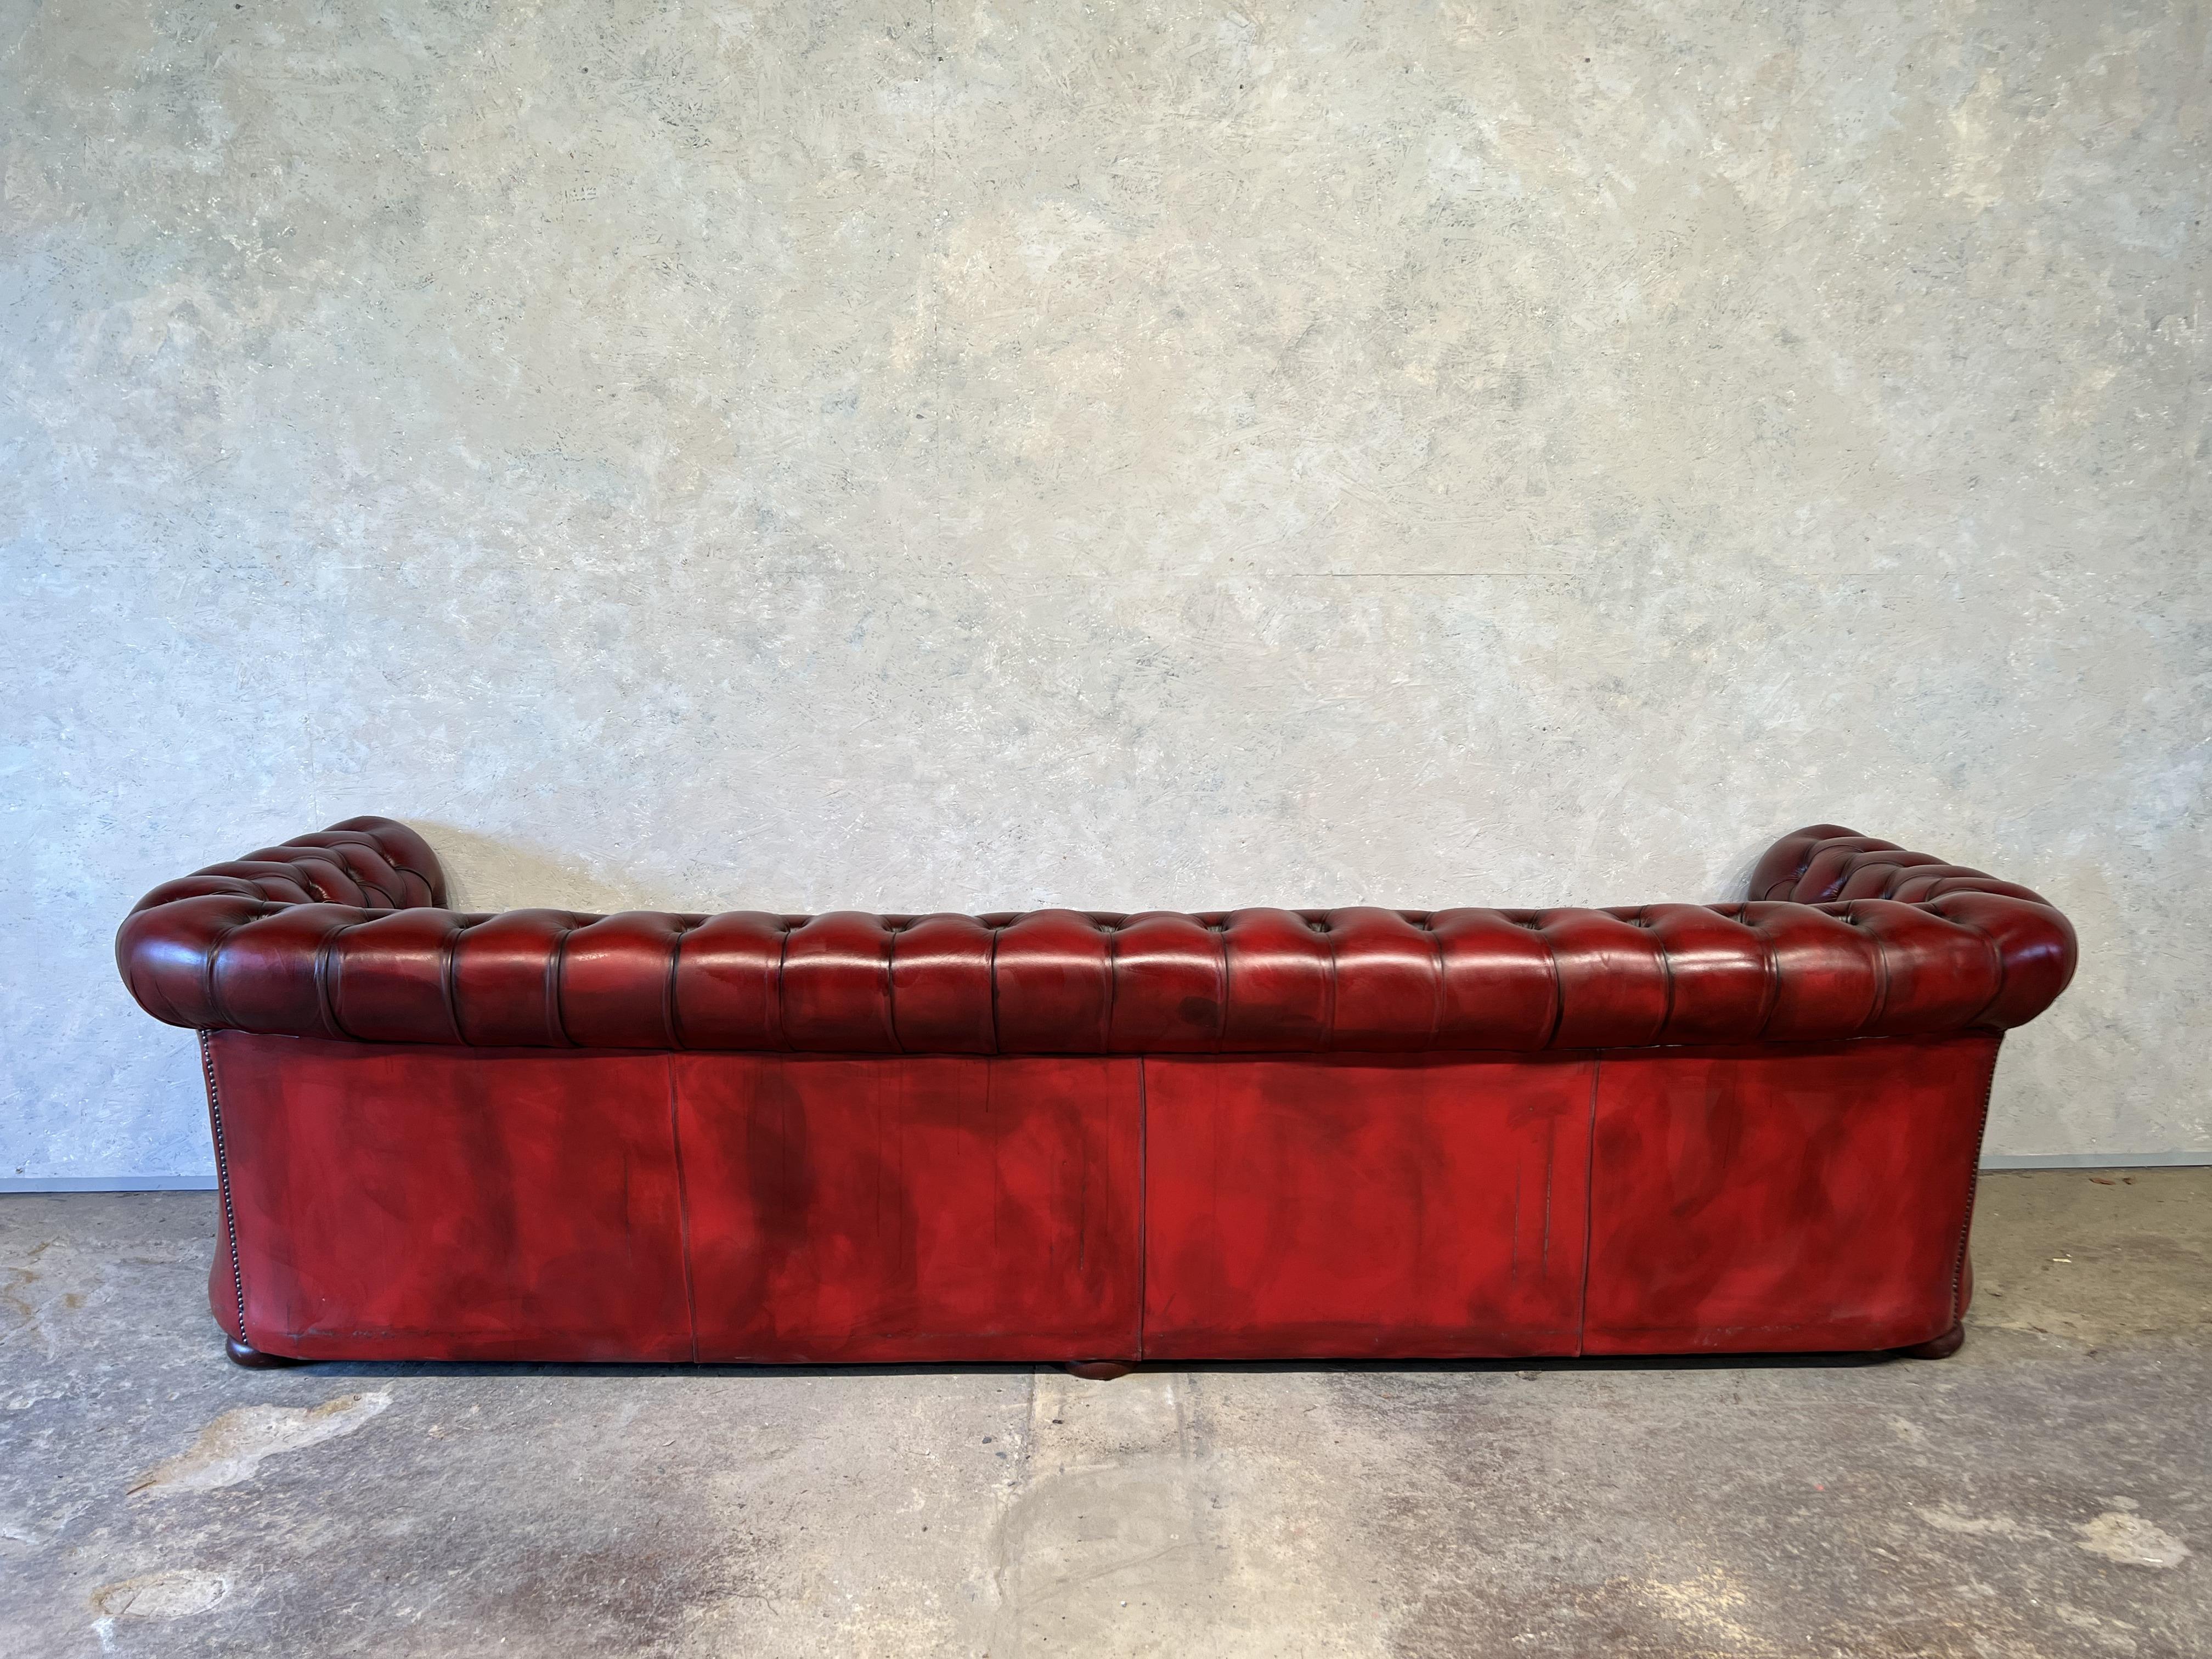 Impressive 10 Ft Long Hand Dyed Leather Chestnut Brown Chesterfield Sofa #346 4